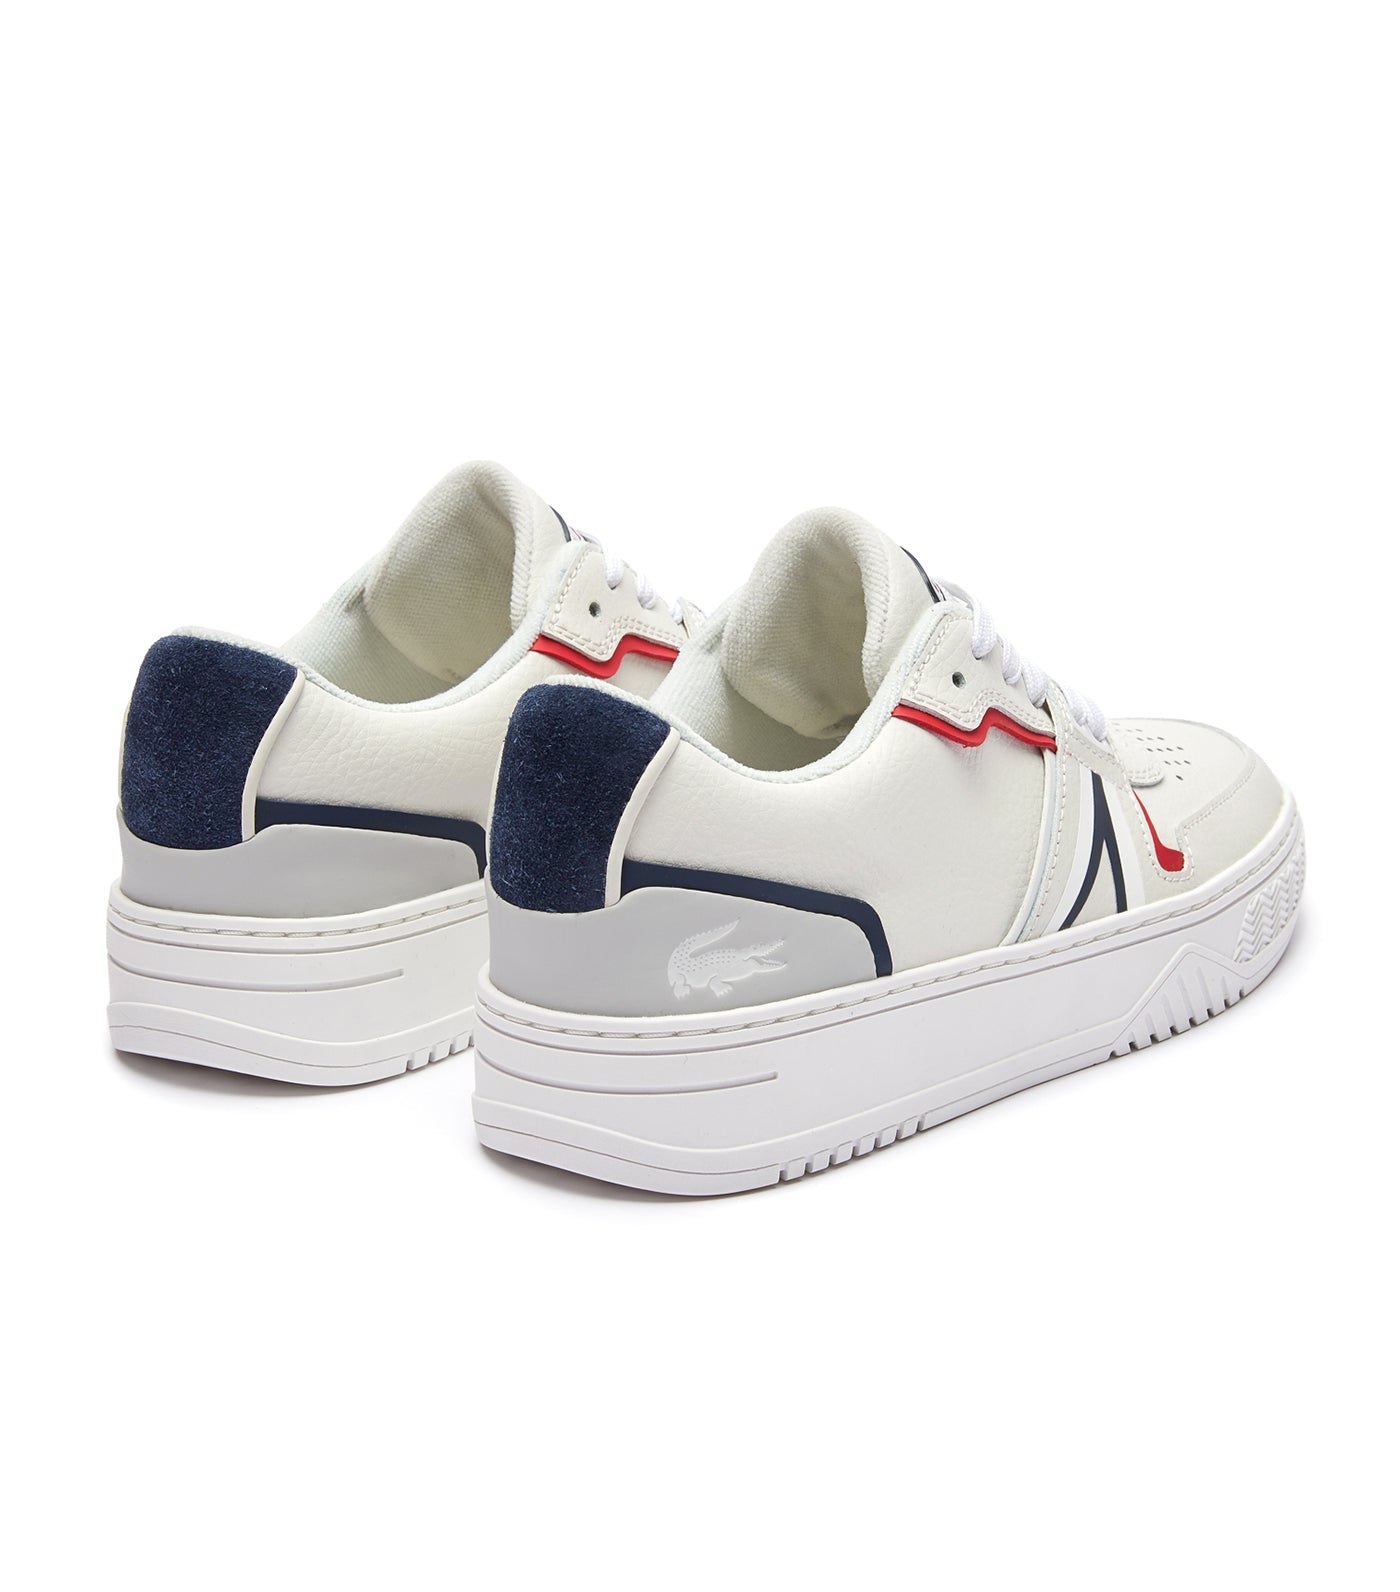 Men's L001 0321 1 Leather Sneakers White/Navy/Red